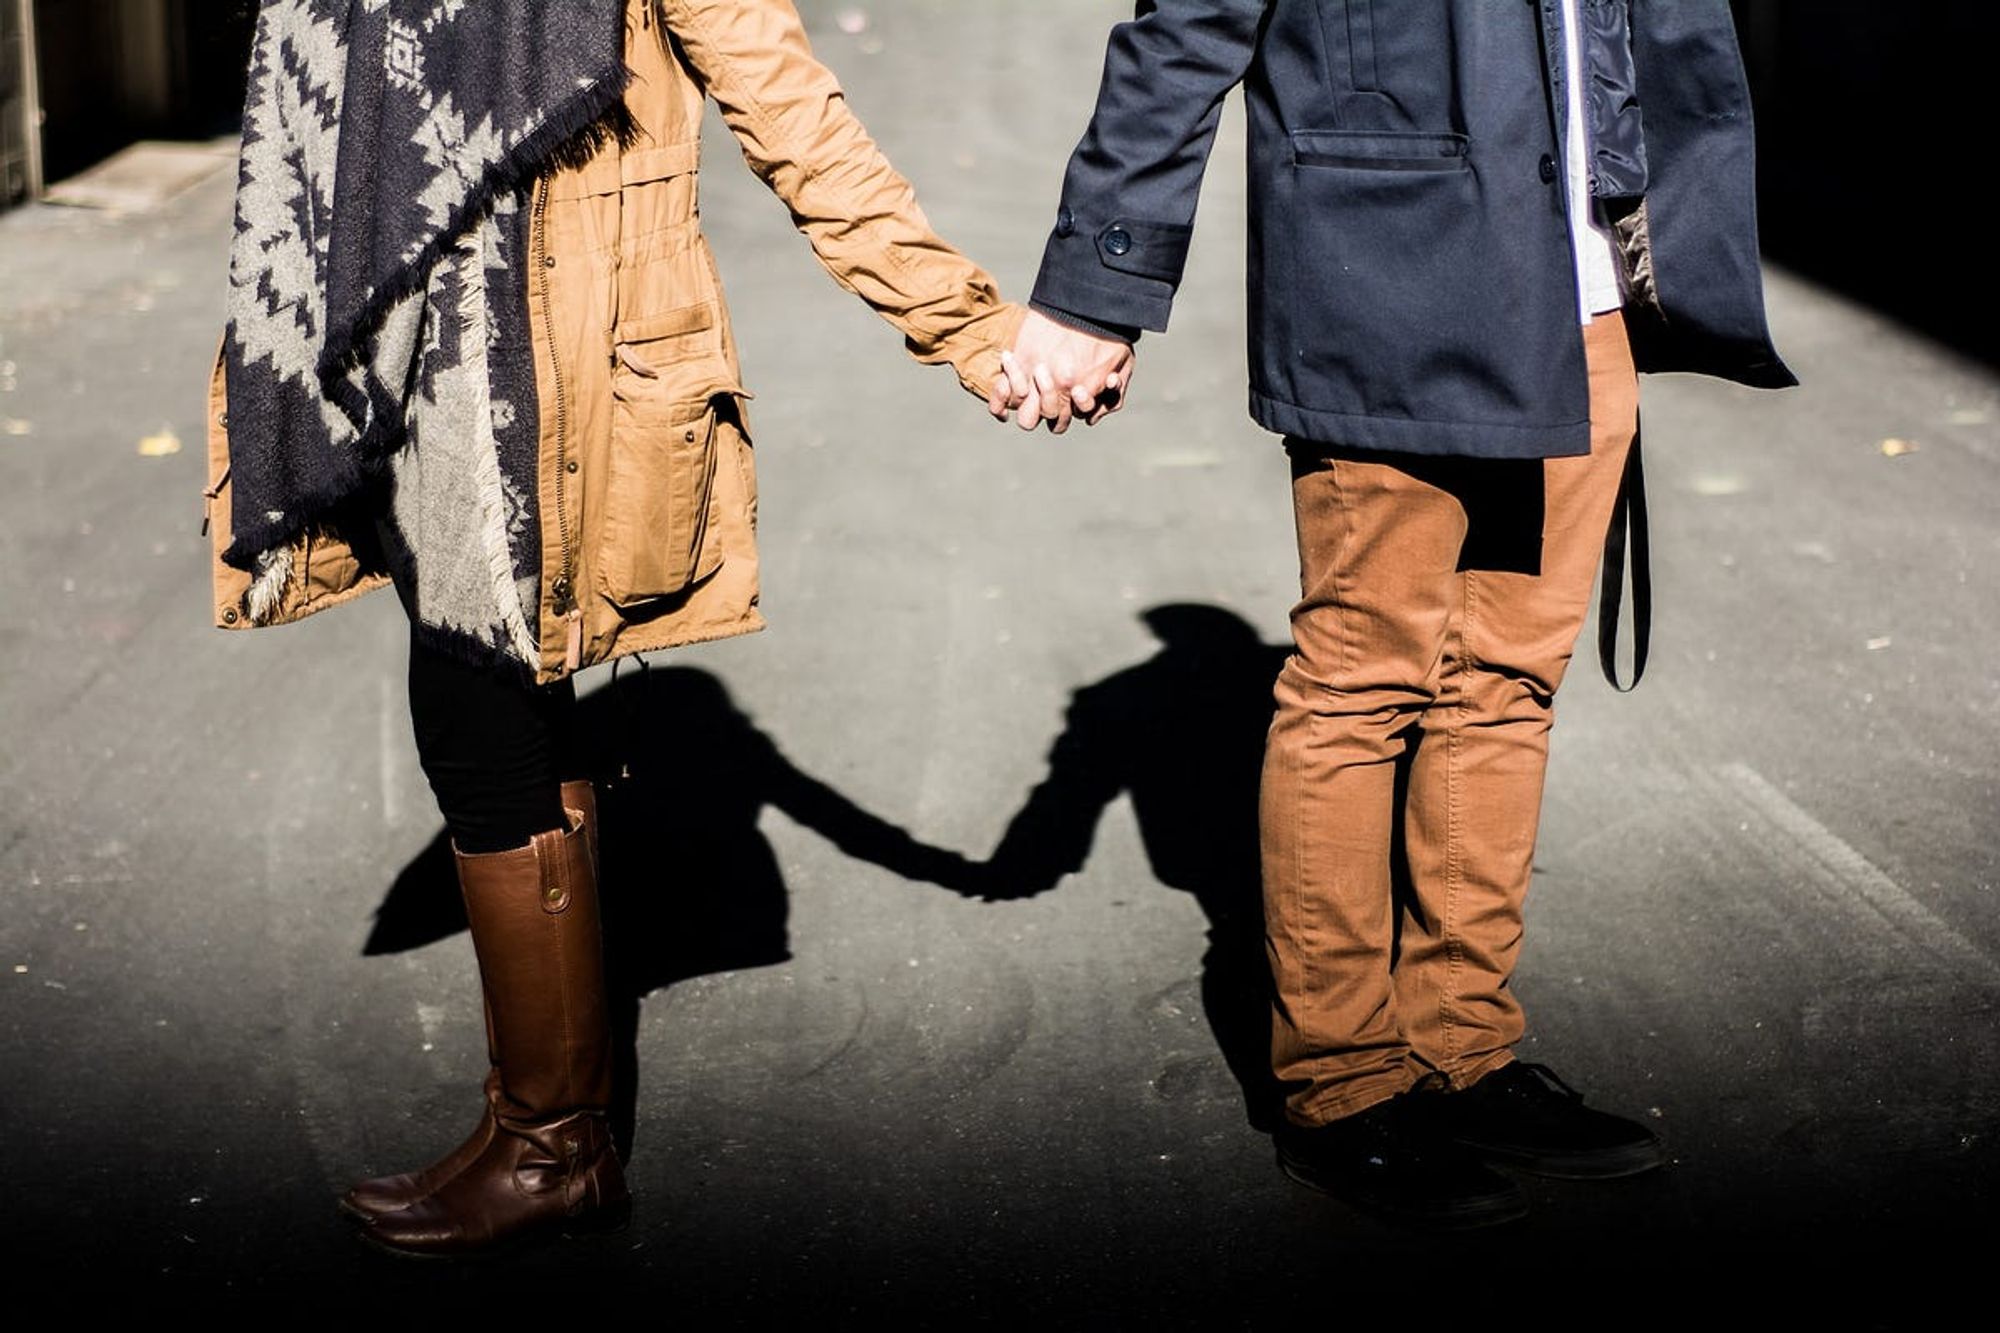 Why You Shouldn’t Feel Guilty for Pushing Them Away